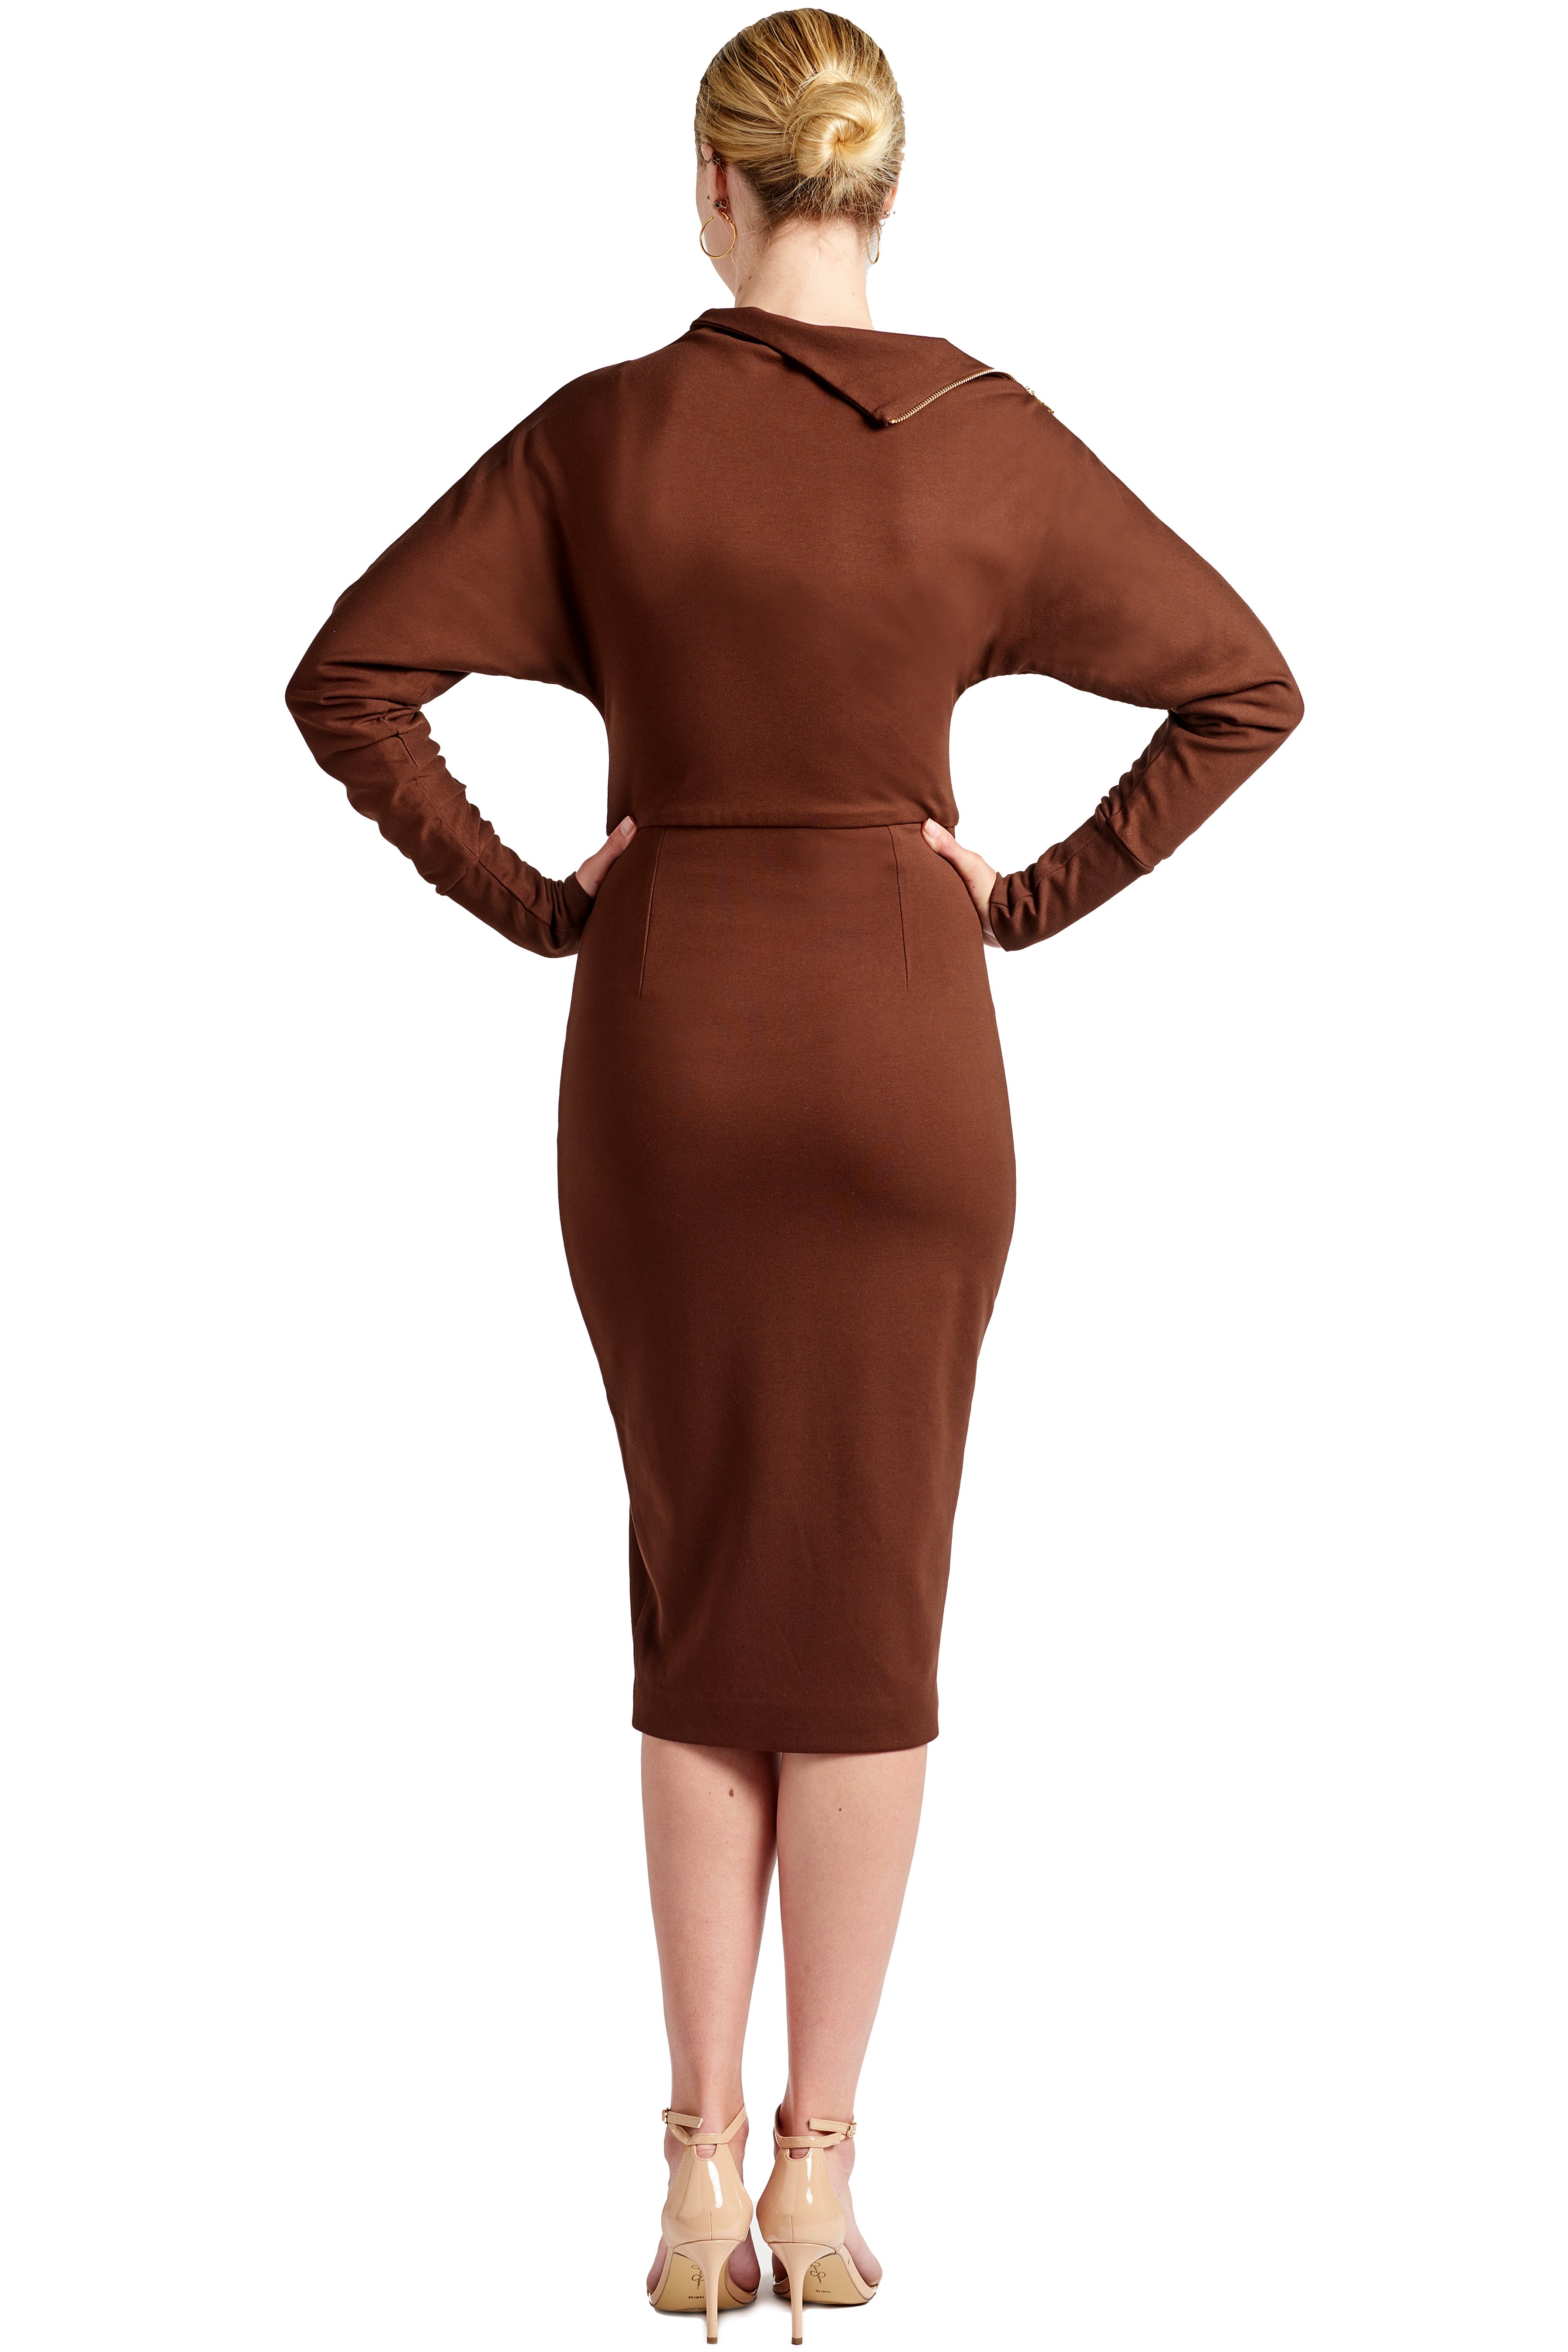 Back view of model wearing the Simona Maghen Josefa Dress, chocolate brown long sleeve Ponte midi dress with zipper along the right shoulder and front skirt zipper slit.